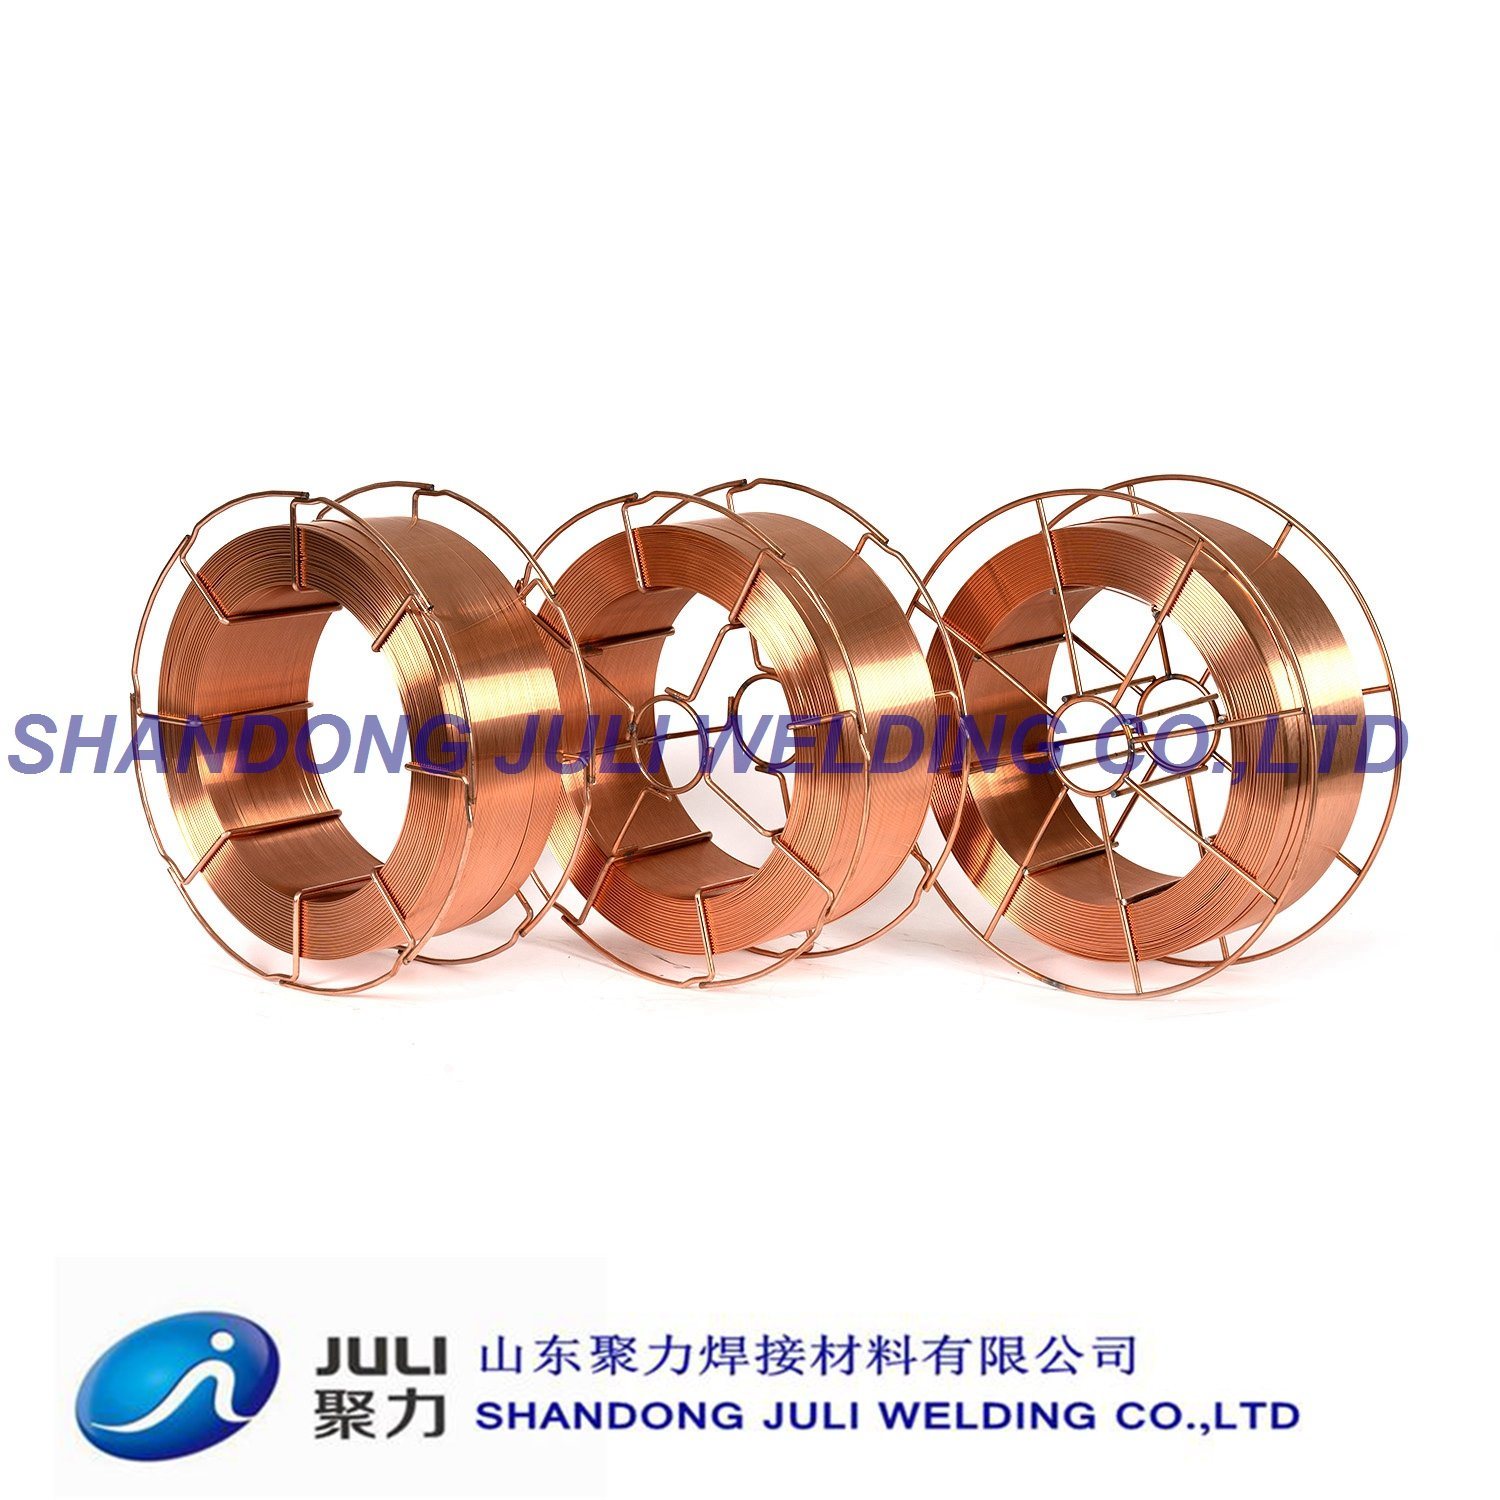 Juli Soft Solid Wire Er70s-6 Copper Coated Coil Nail Welding Wire with ABS CE CCS TUV